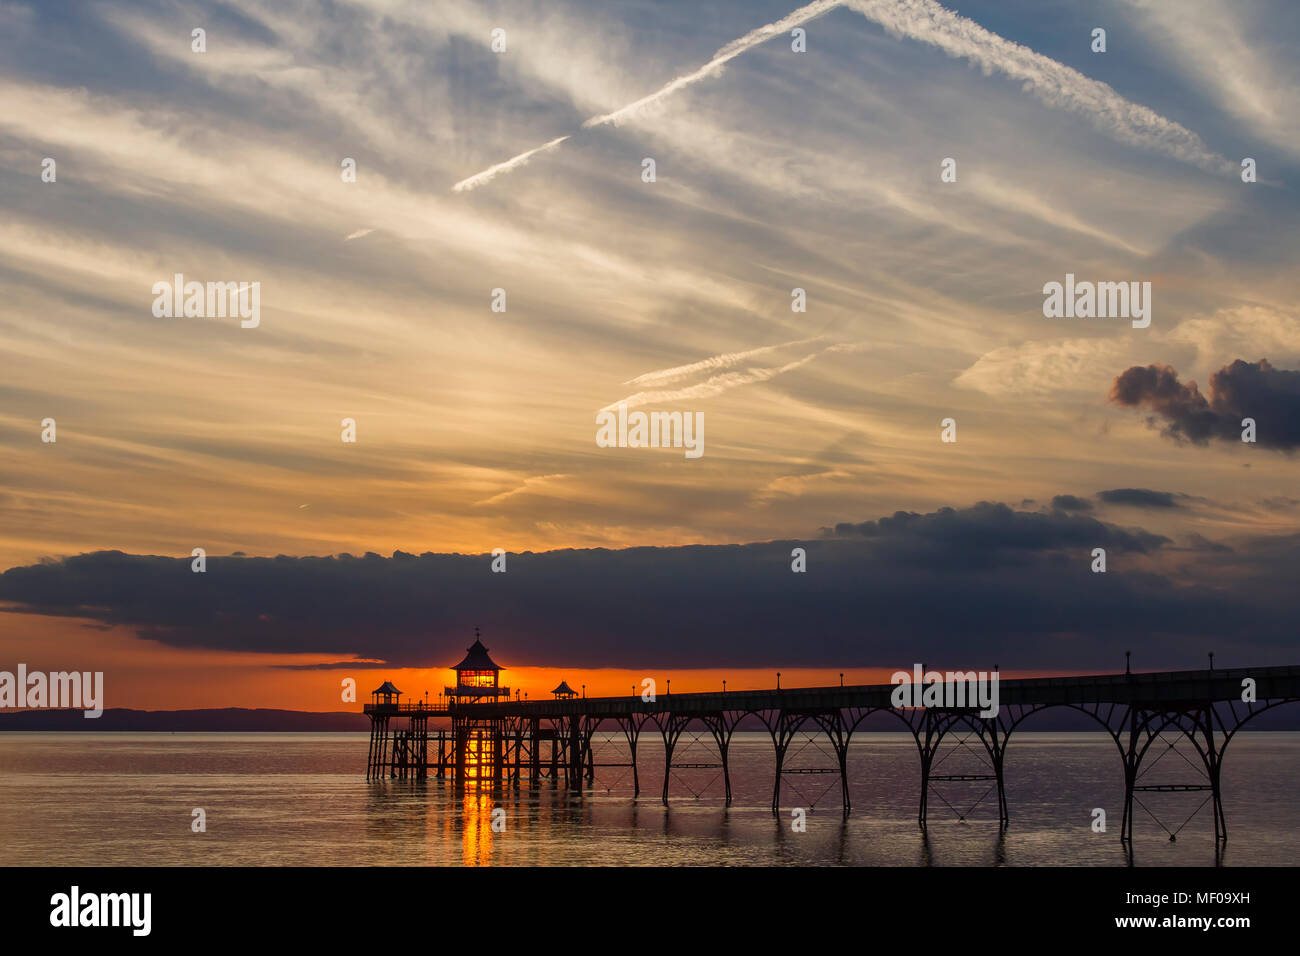 Clevedon Pier at Sunset with a streak of orangey reddish sunlight going through the Pier head Stock Photo